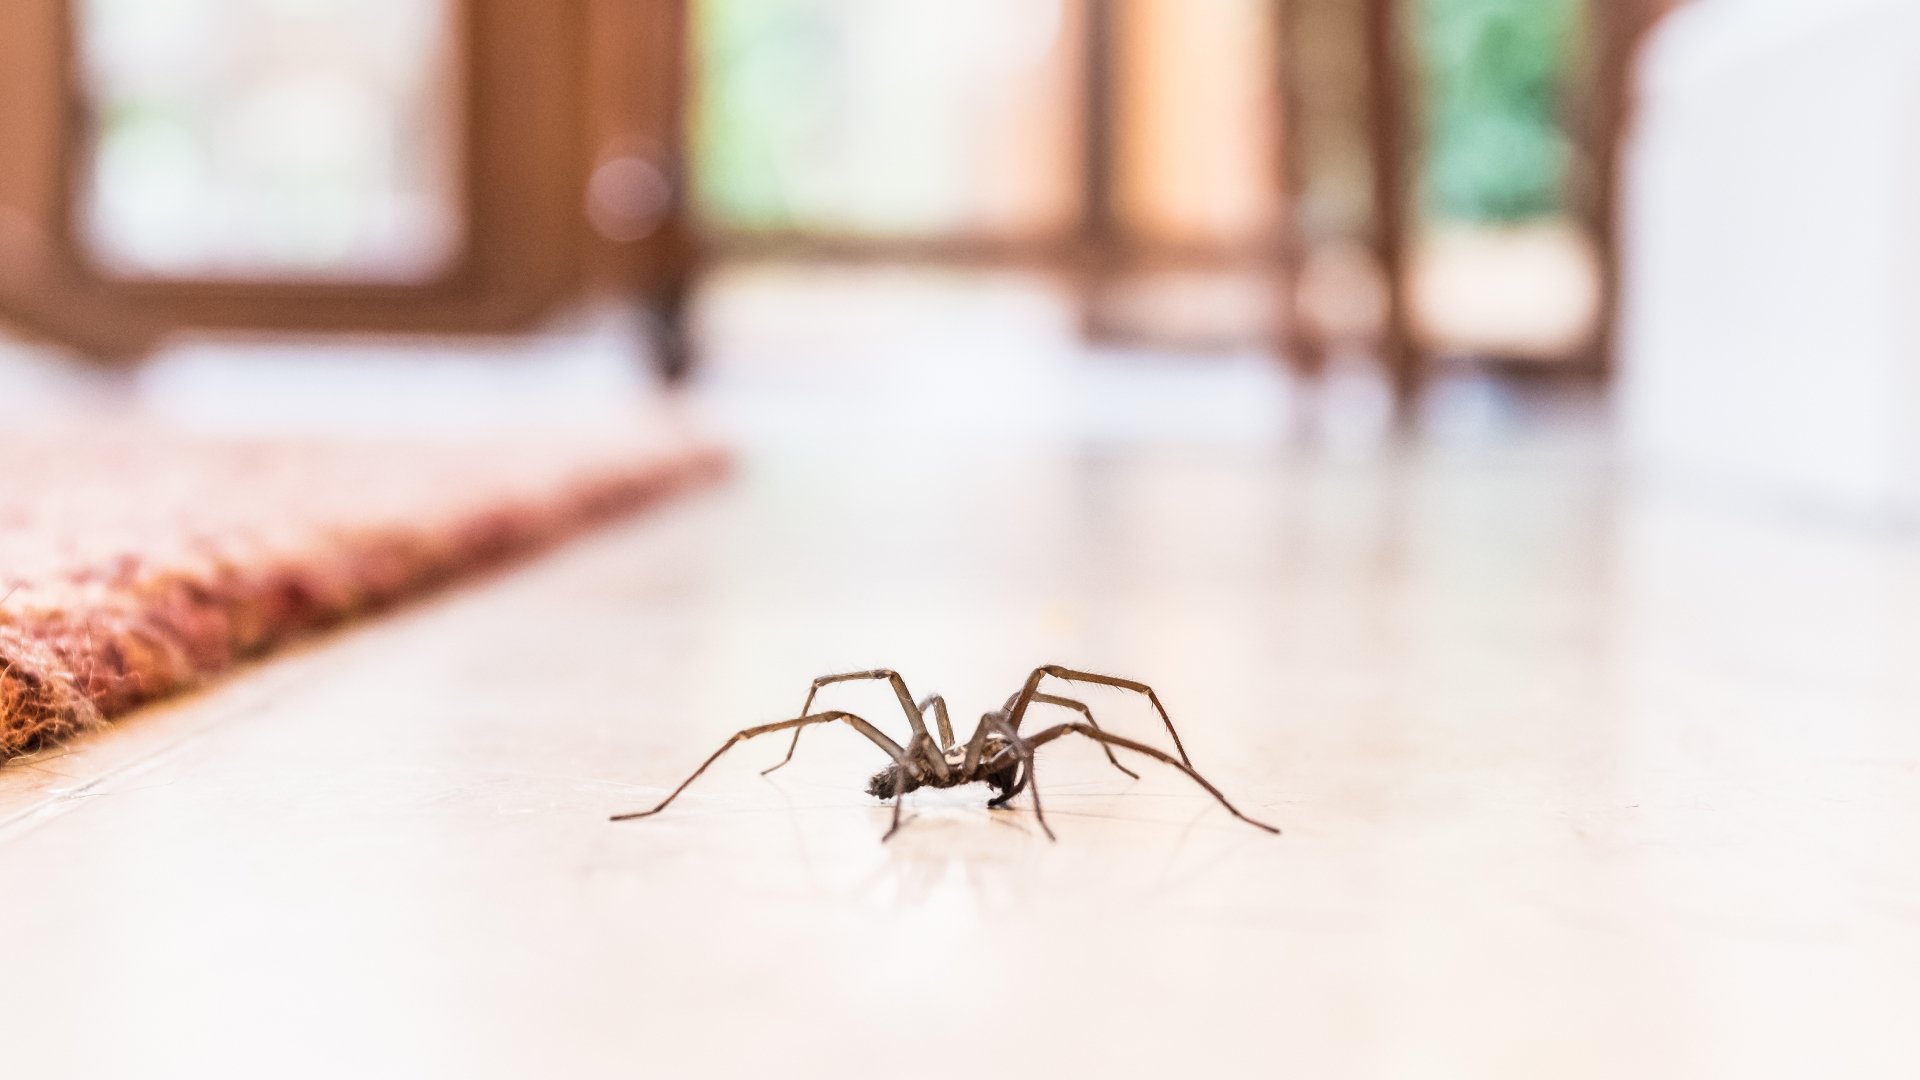 3 Things You Can Do to Help Keep Spiders From Infesting Your Home